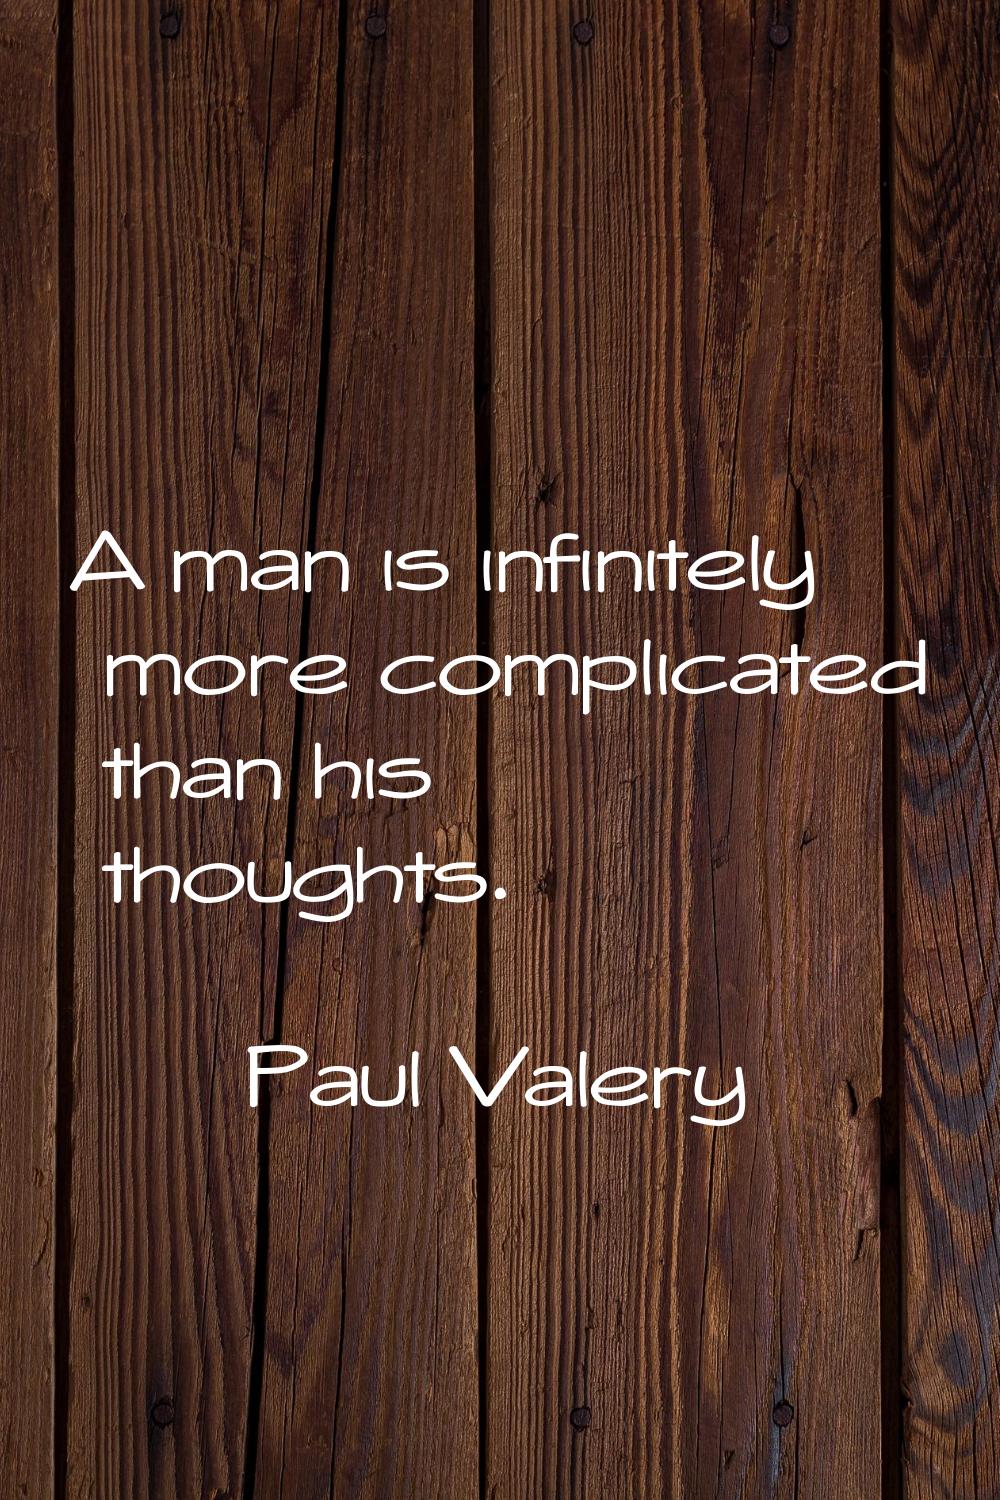 A man is infinitely more complicated than his thoughts.